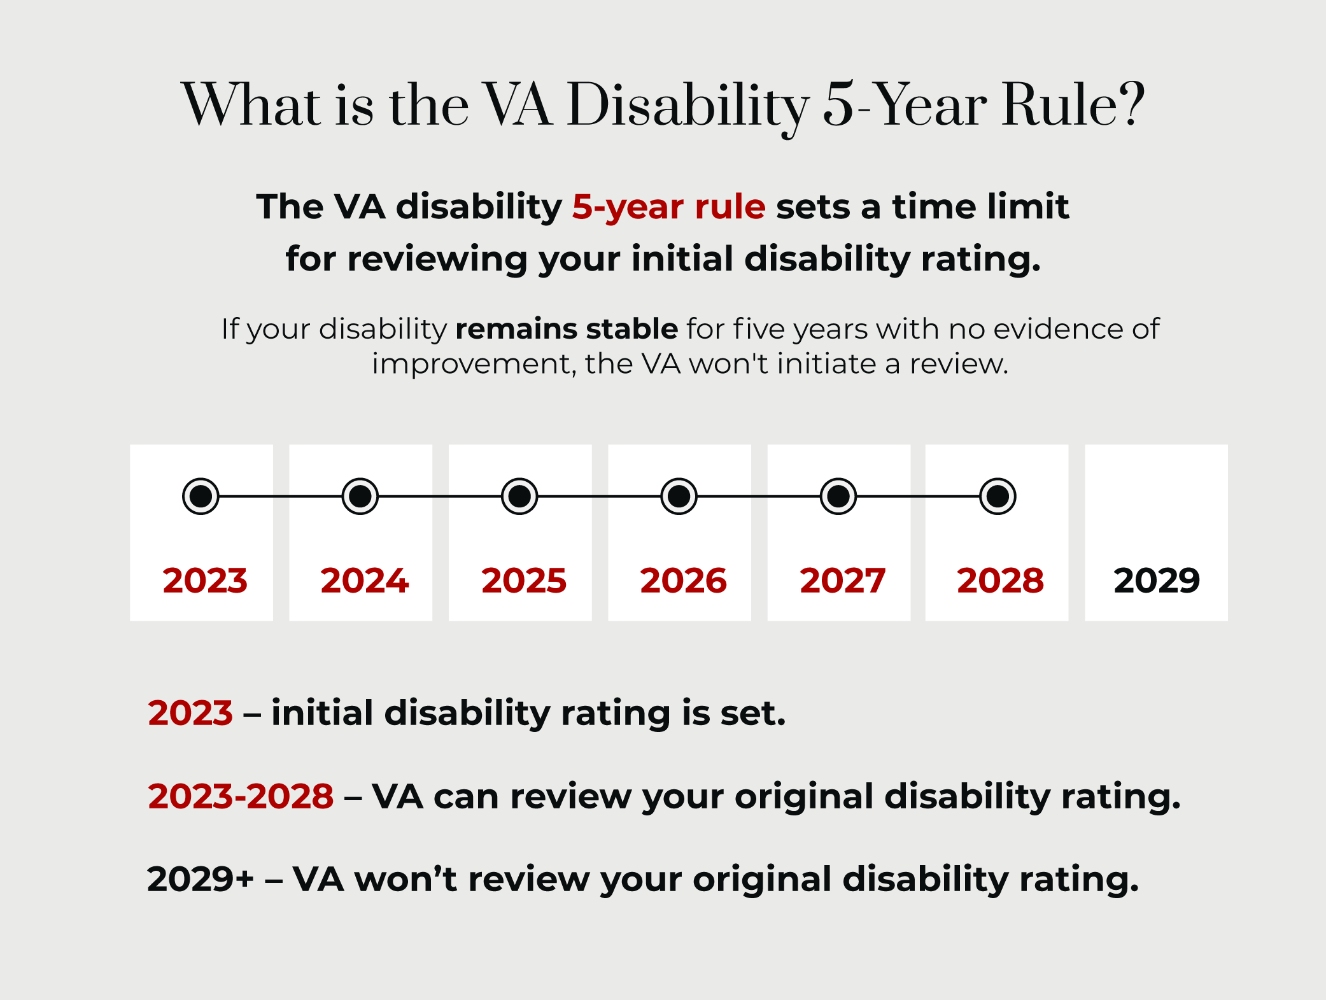 what is the VA disability 5-year rule?